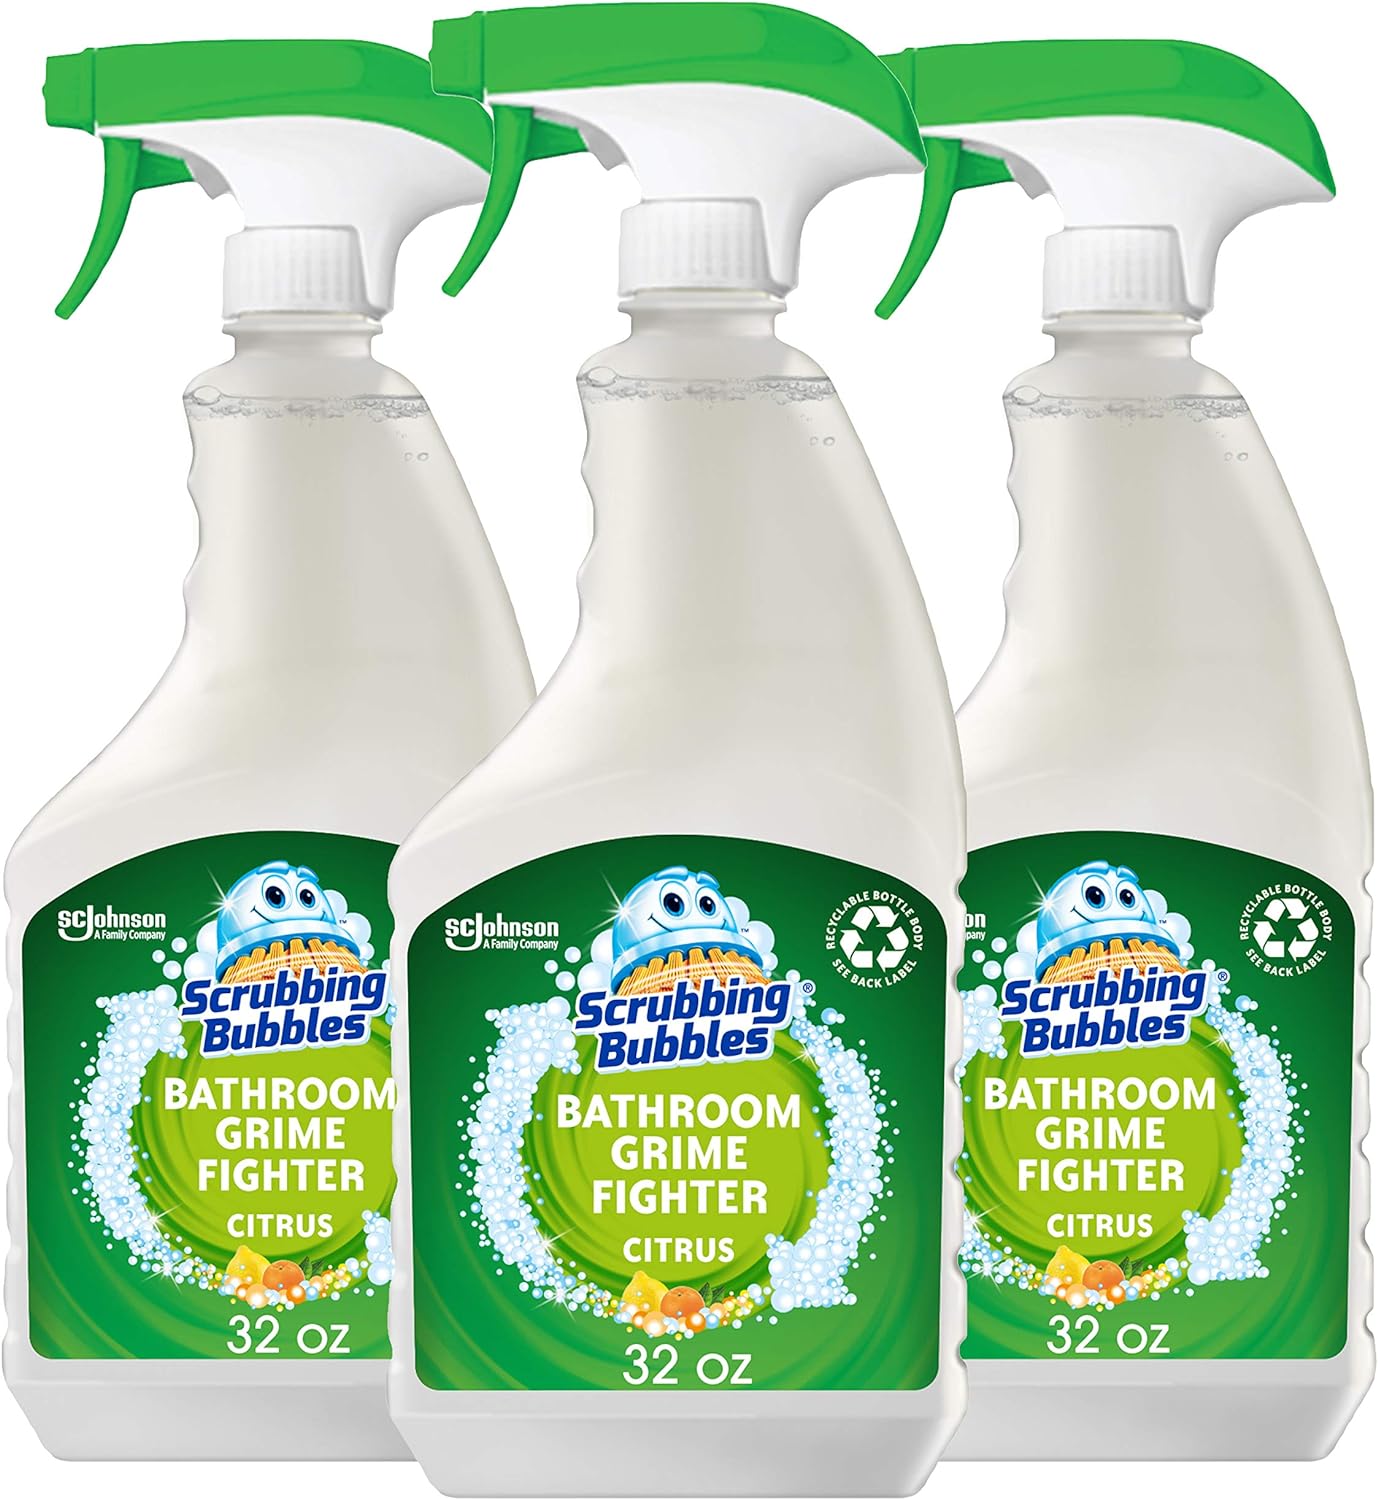 Scrubbing Bubbles Bathroom Grime Fighter Spray in Recyclable Bottle, Citrus, Ideal Bathroom, Tile, Bathtub and Shower Cleaner, 32 oz (Pack of 3)